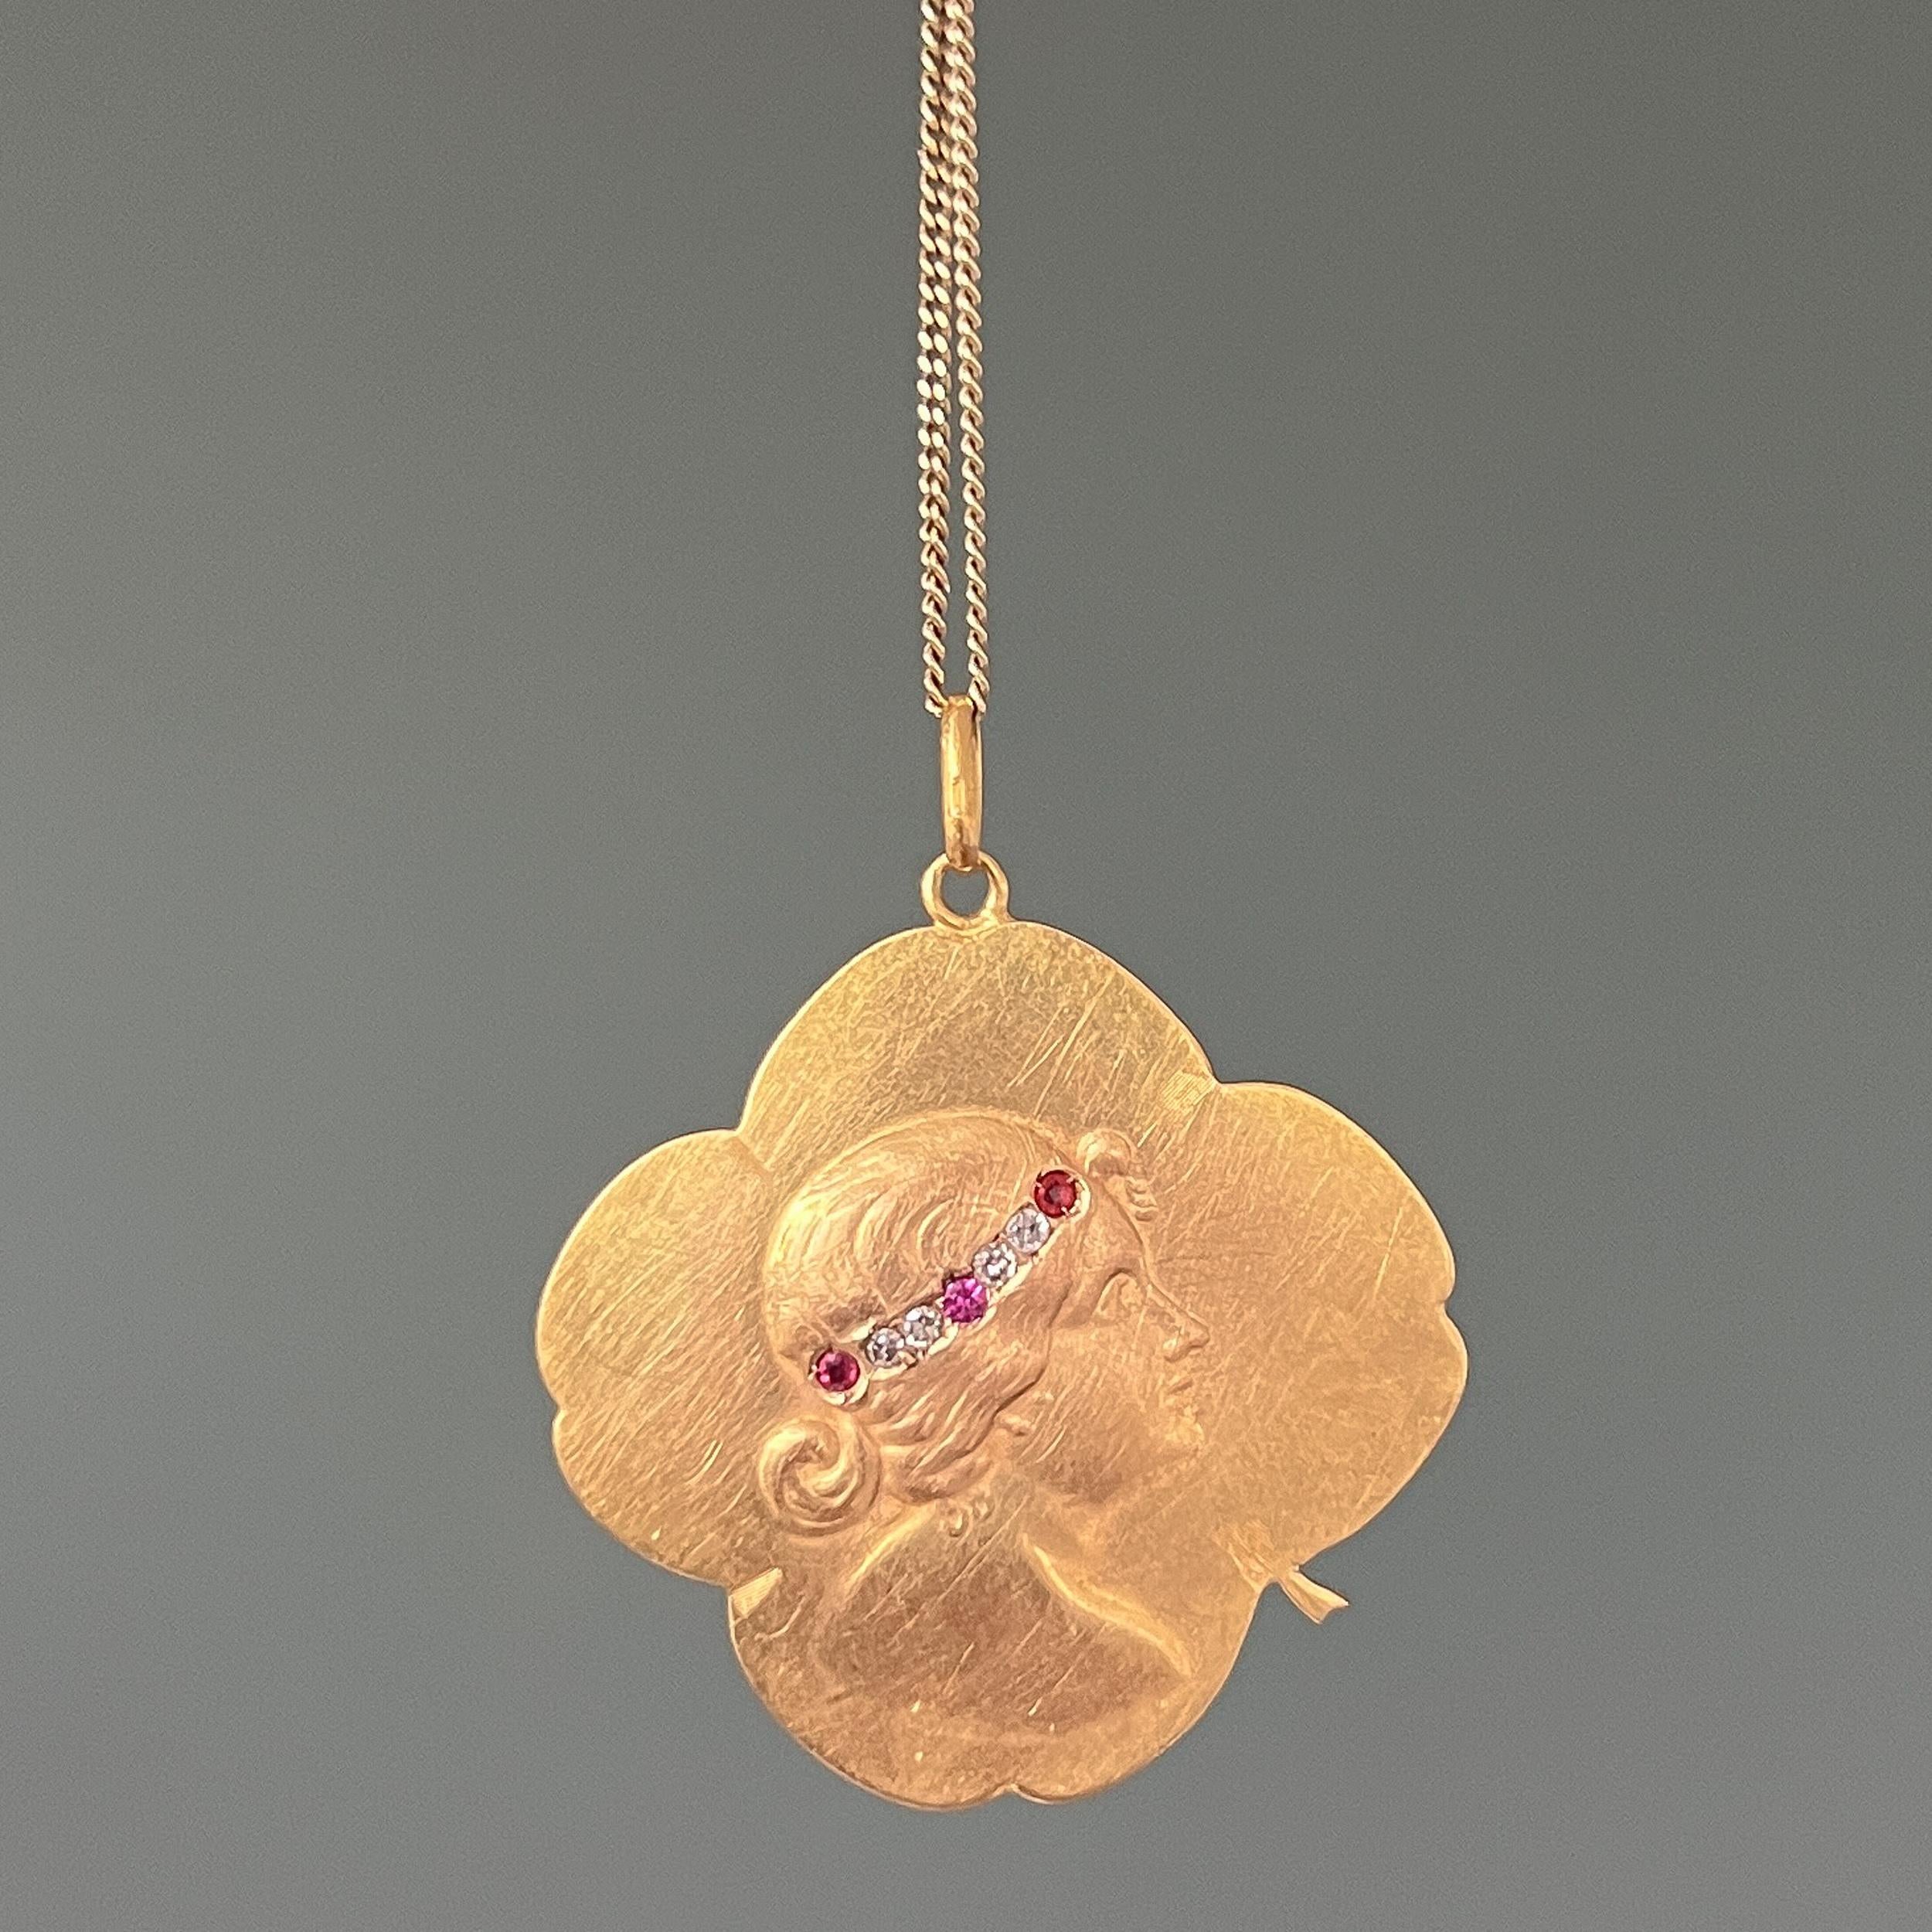 This antique four-leaf clover pendant dates back to the Art Nouveau movement, 1890-1914. The lovely four-leaf clover shape pendant is created in 20 karat yellow gold depicting a female portrait in a bass-relief profil. She is wearing a headband